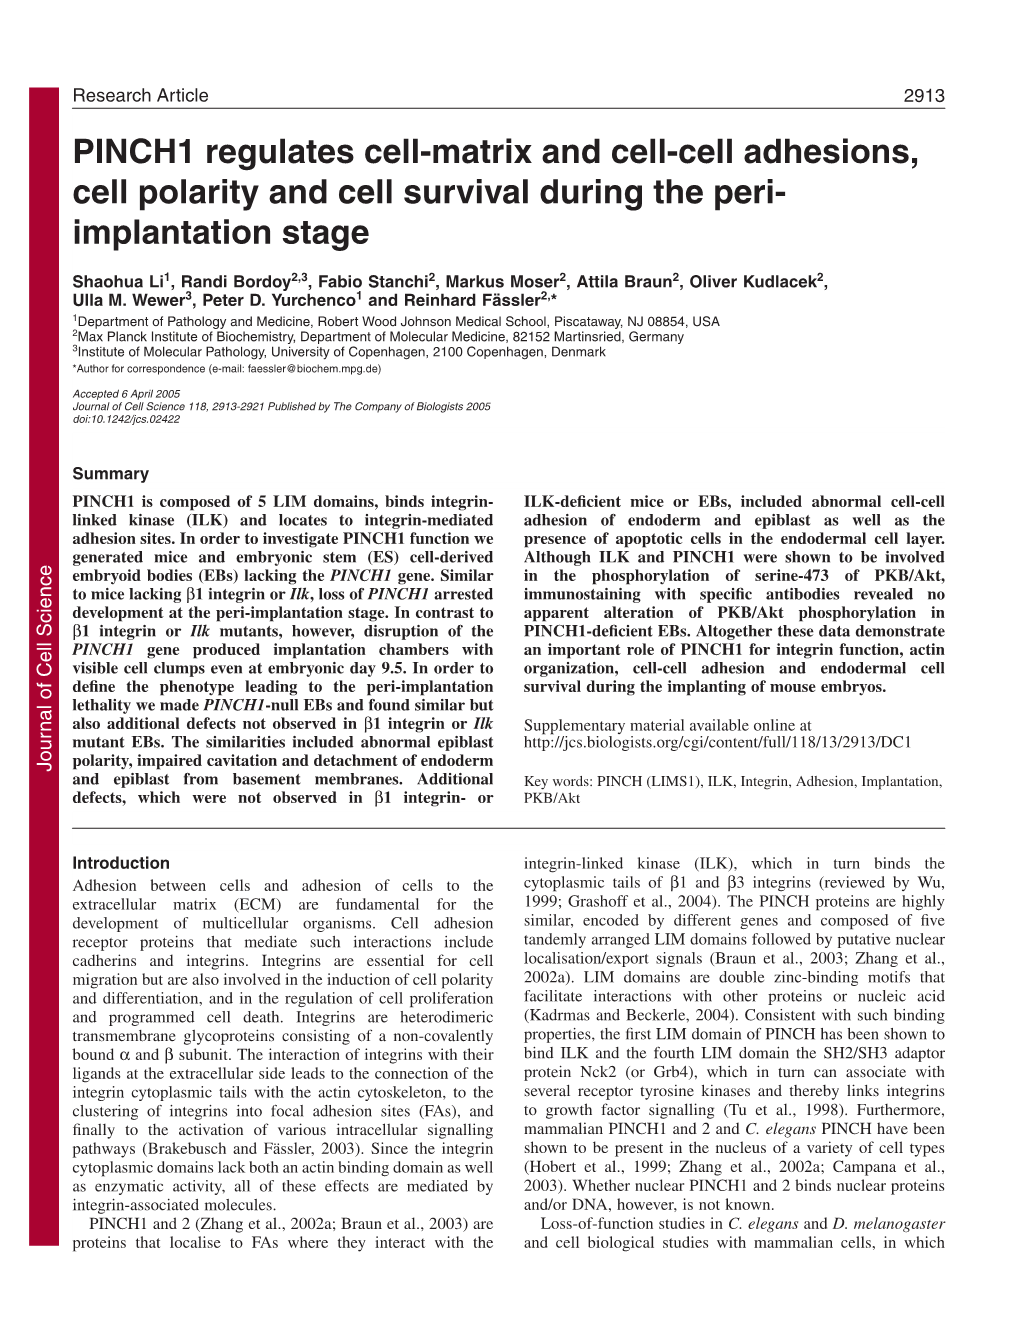 PINCH1 Regulates Cell-Matrix and Cell-Cell Adhesions, Cell Polarity and Cell Survival During the Peri- Implantation Stage